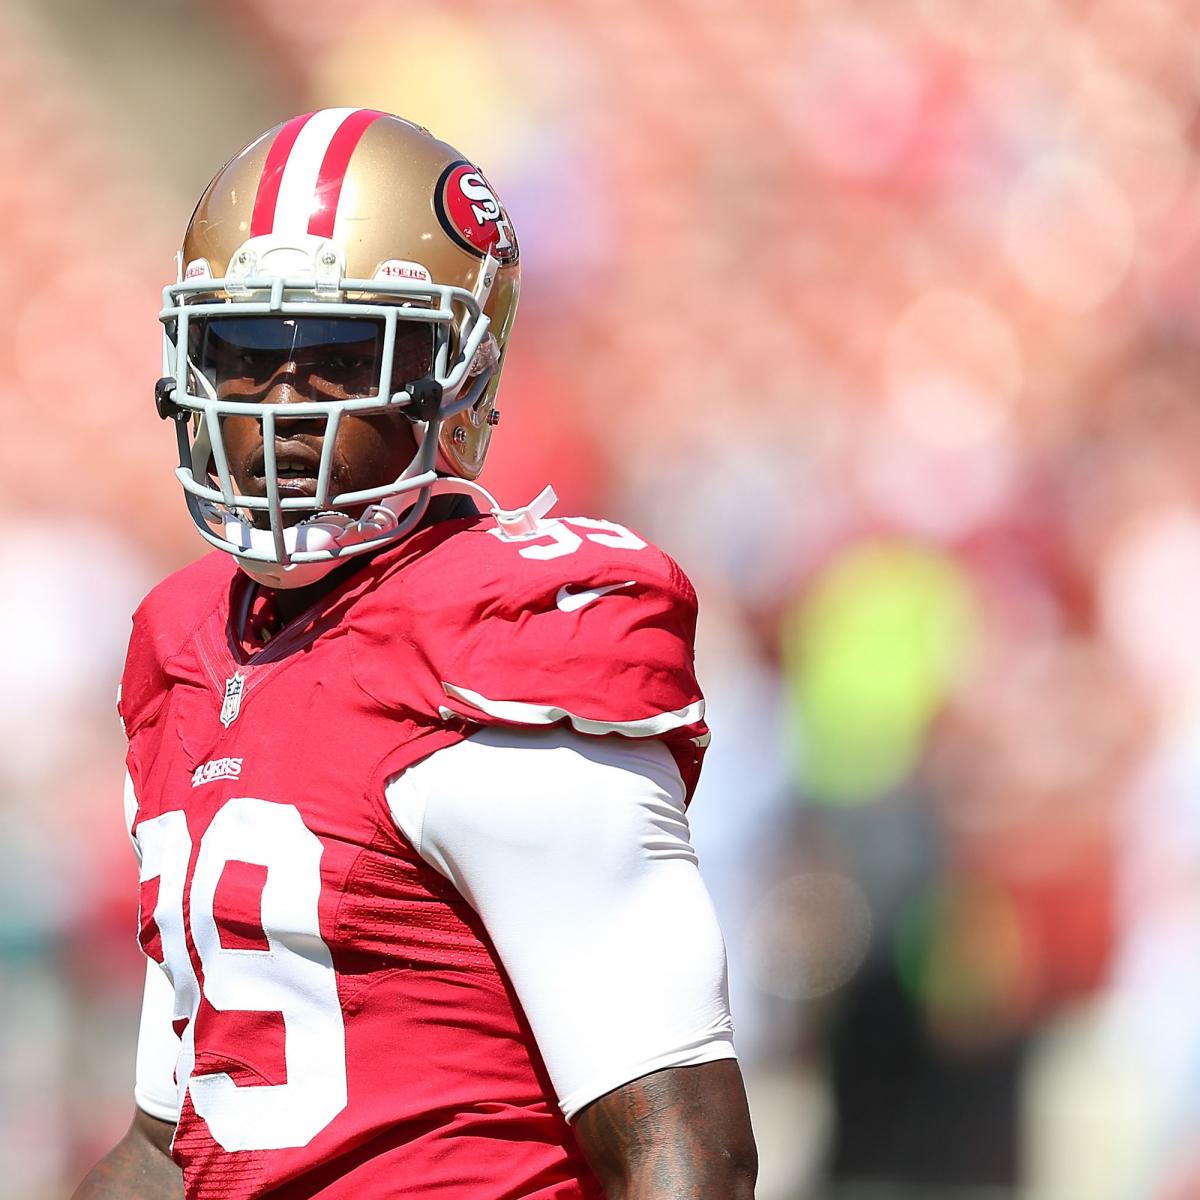 Aldon Smith Injury: Updates on 49ers LB's Status and Recovery | Bleacher Report ...